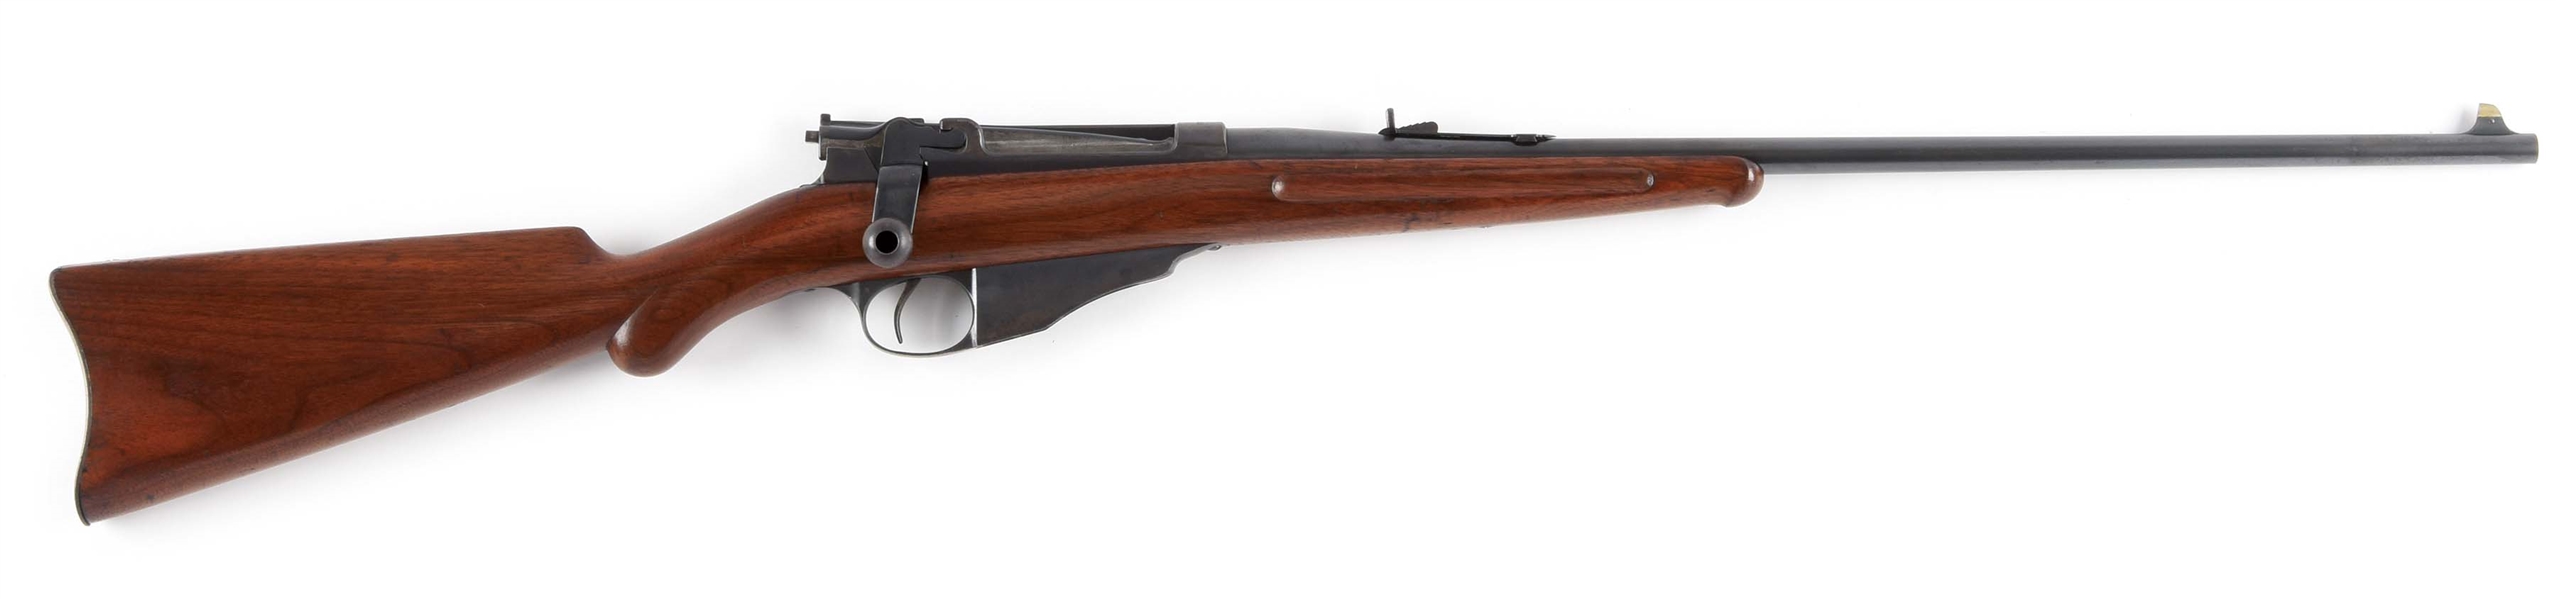 (A) FINE CONDITION EARLY WINCHESTER LEE STRAIGHT PULL SPORTING RIFLE (1898).